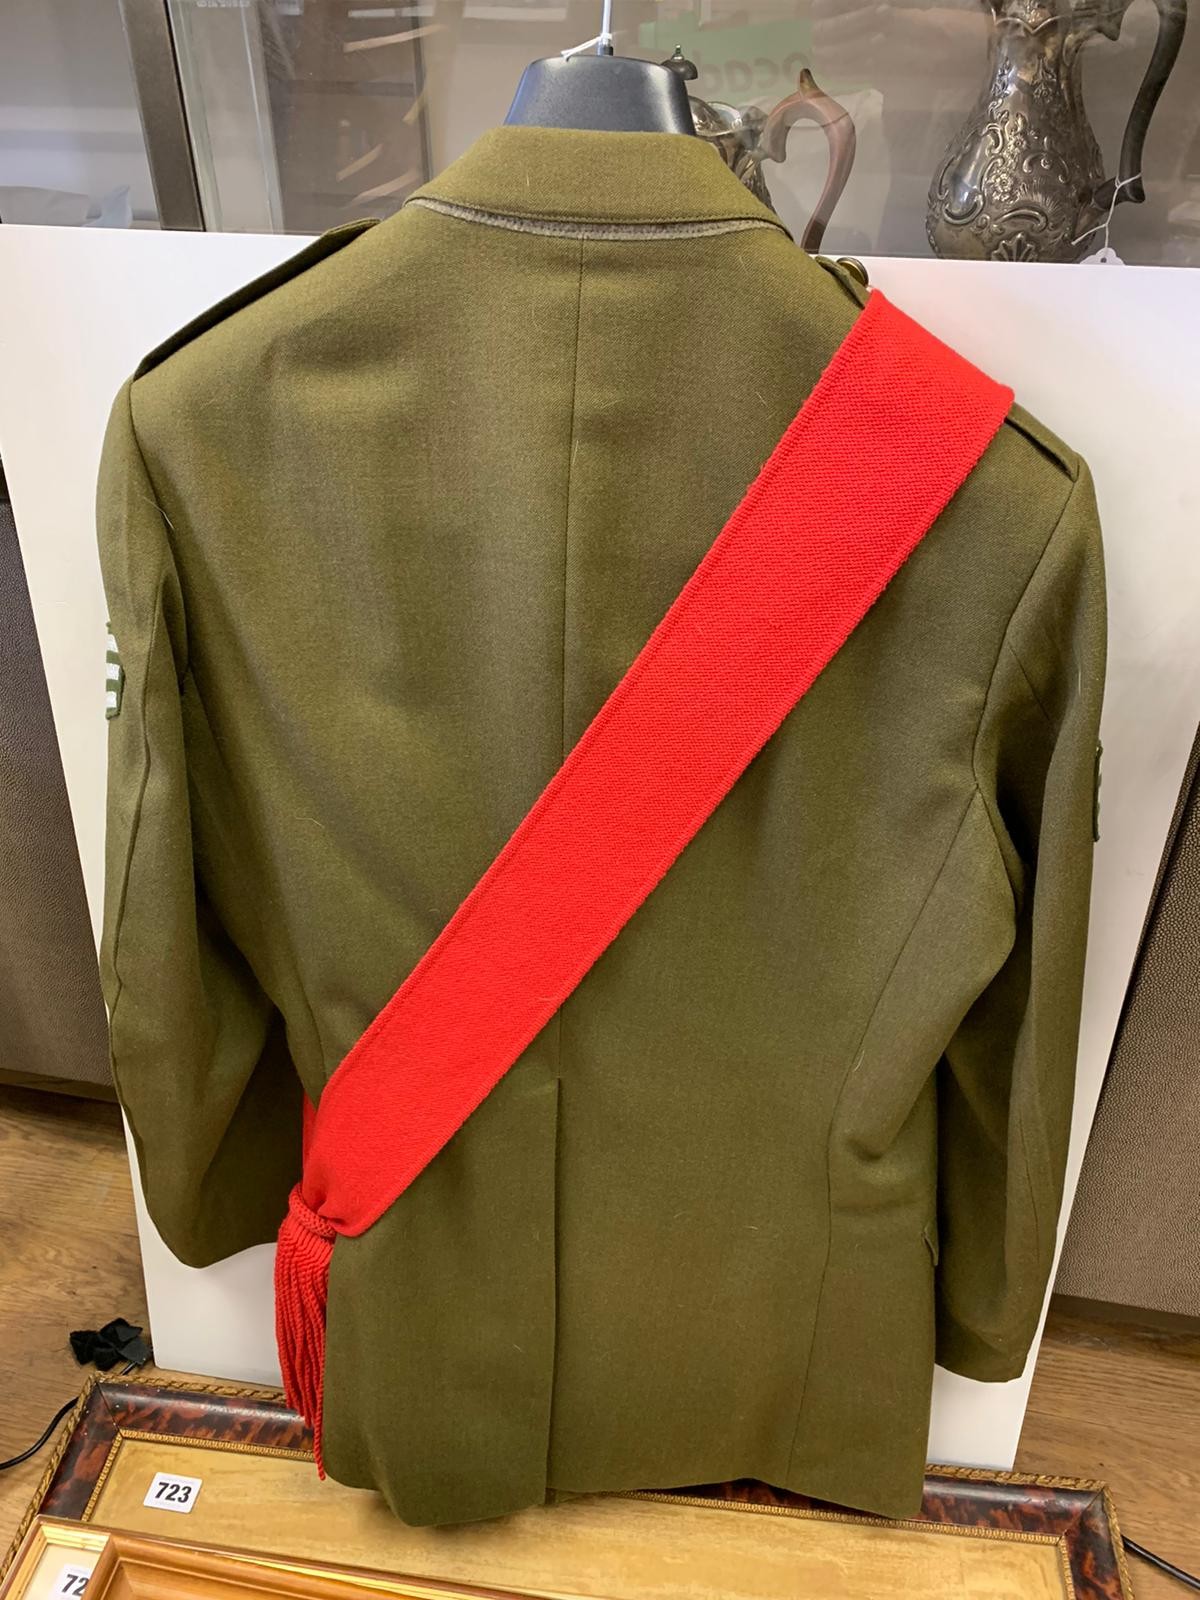 Territorial army sergeant uniform with warrant officer Red Sash - Image 4 of 7